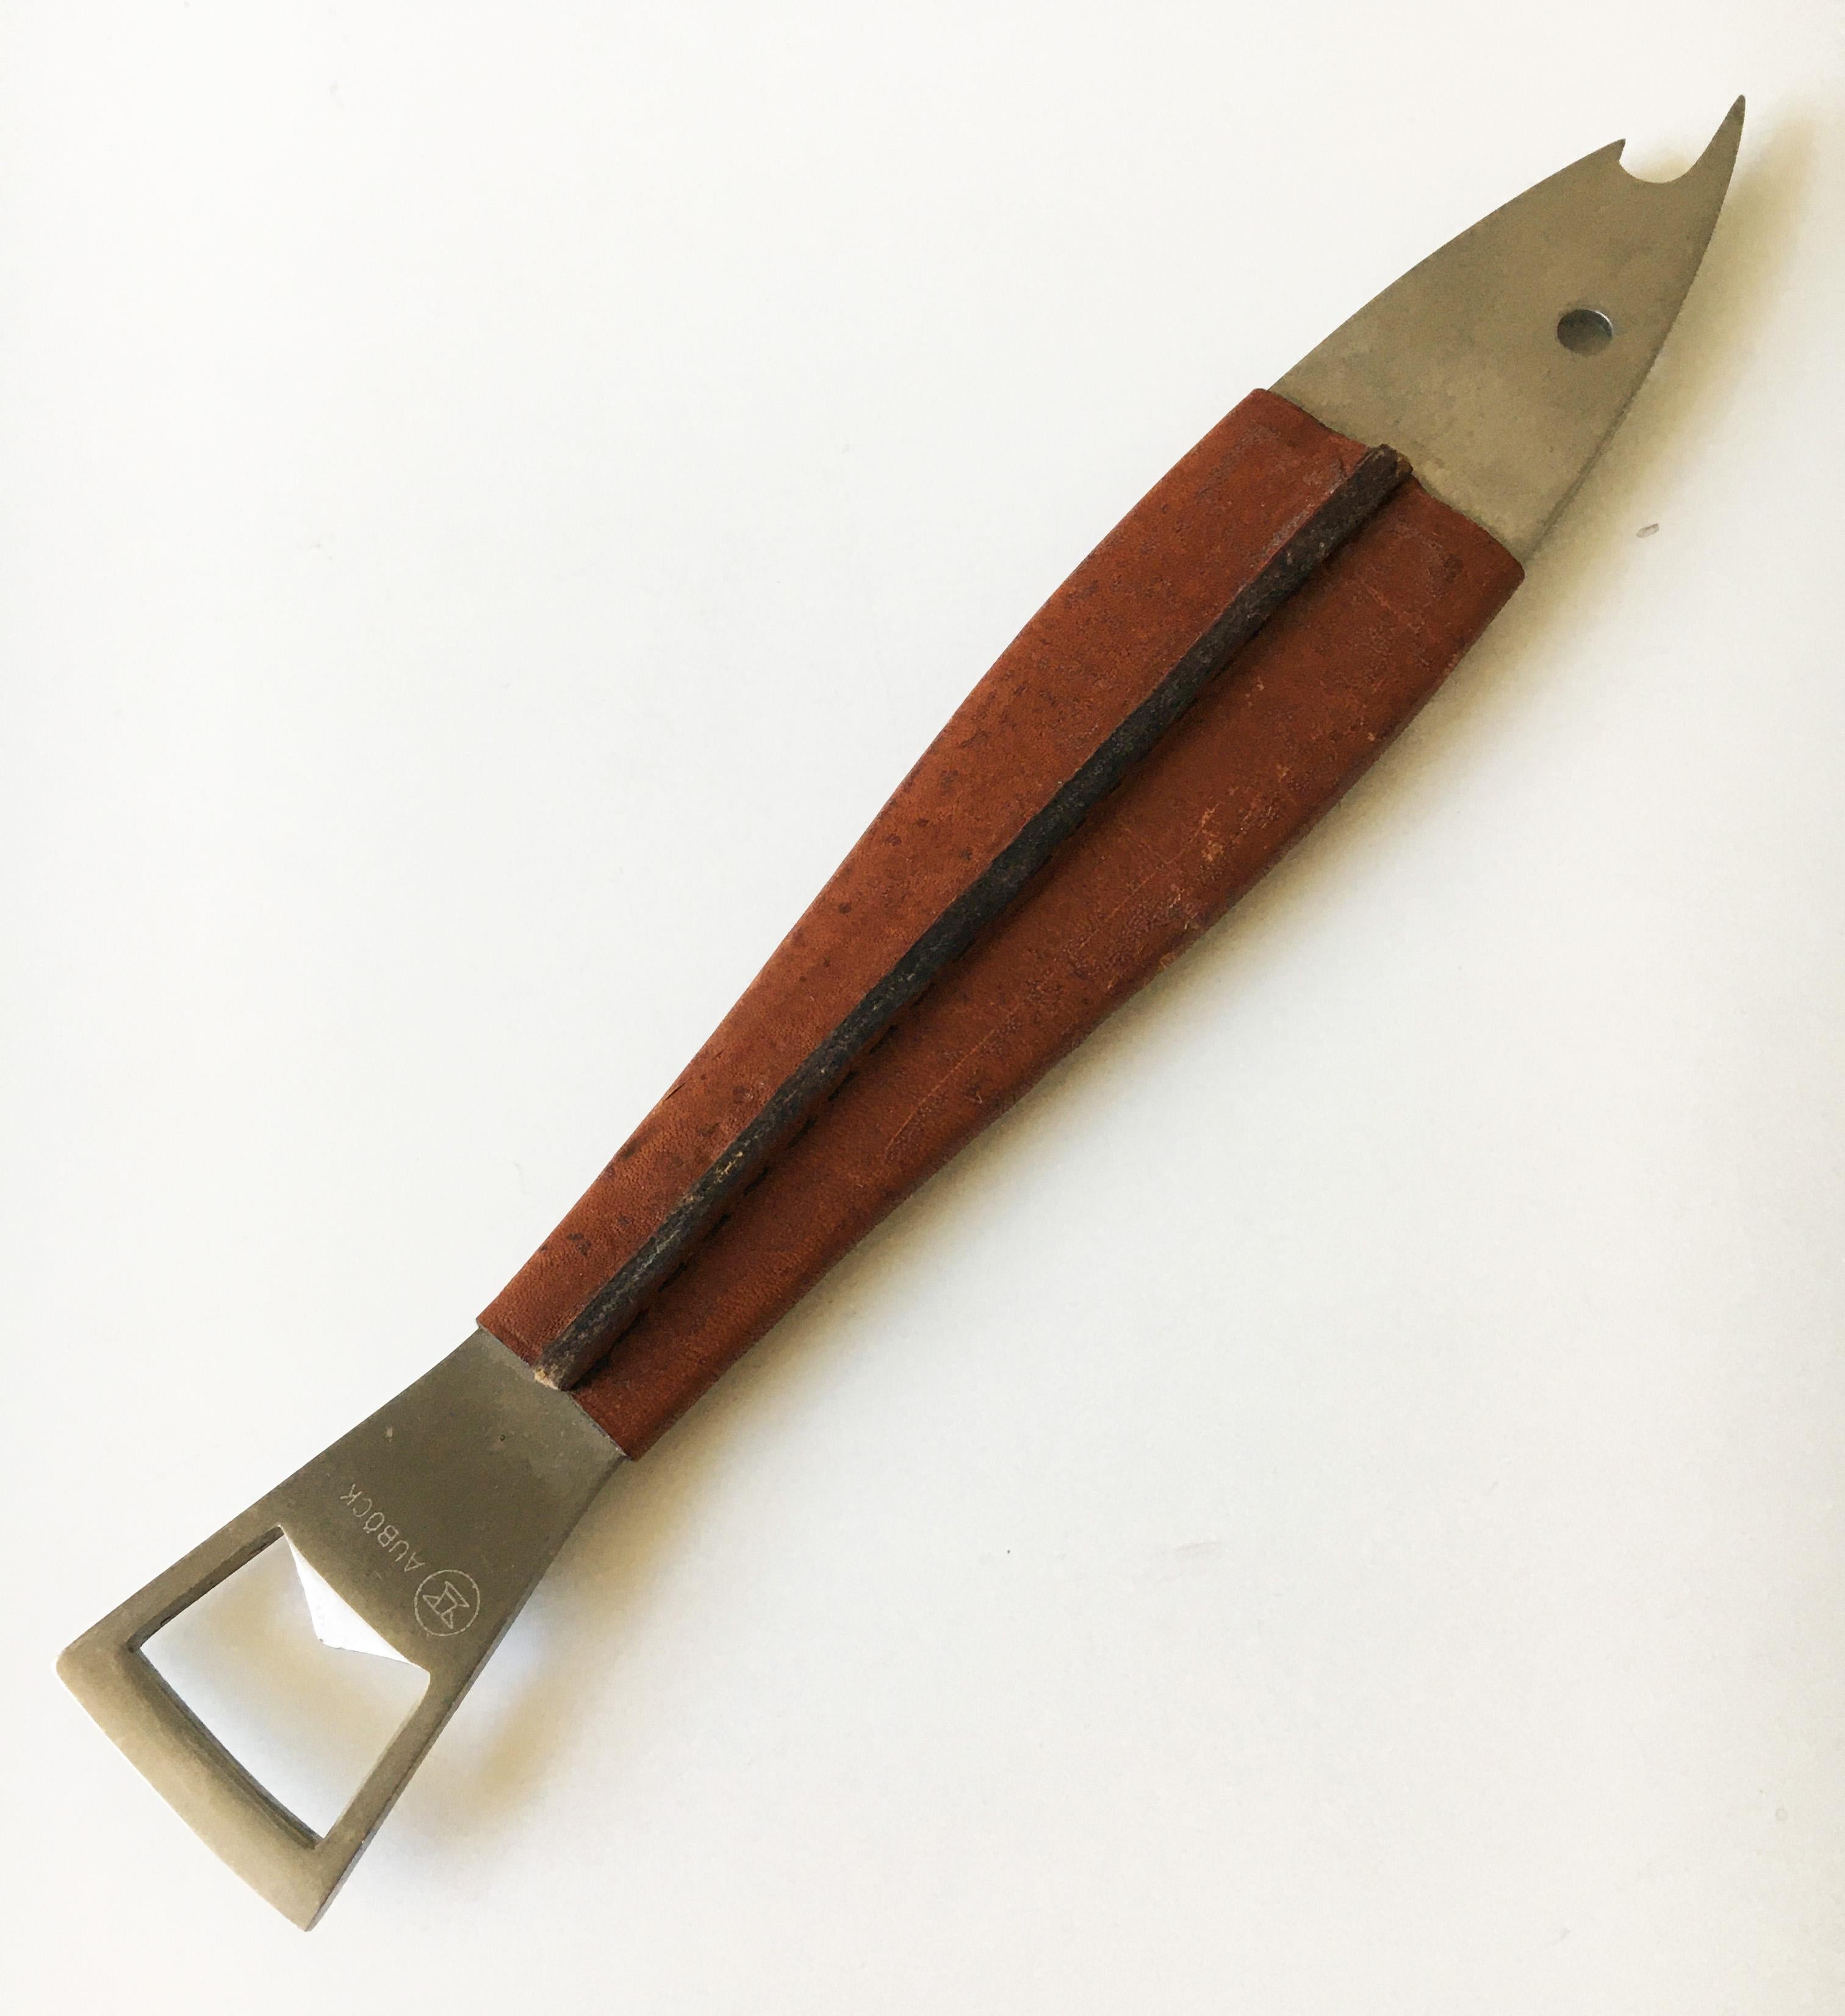 A beautiful fish-shaped modernist bottle opener from the 1950s Neptune #1, made of stainless steel, covered with cognac leather. Designed by Carl Auböck. Executed by Amboss Austria. Lovely, soft warm patina to the leather. Marked: AUBÖCK & STAINLESS